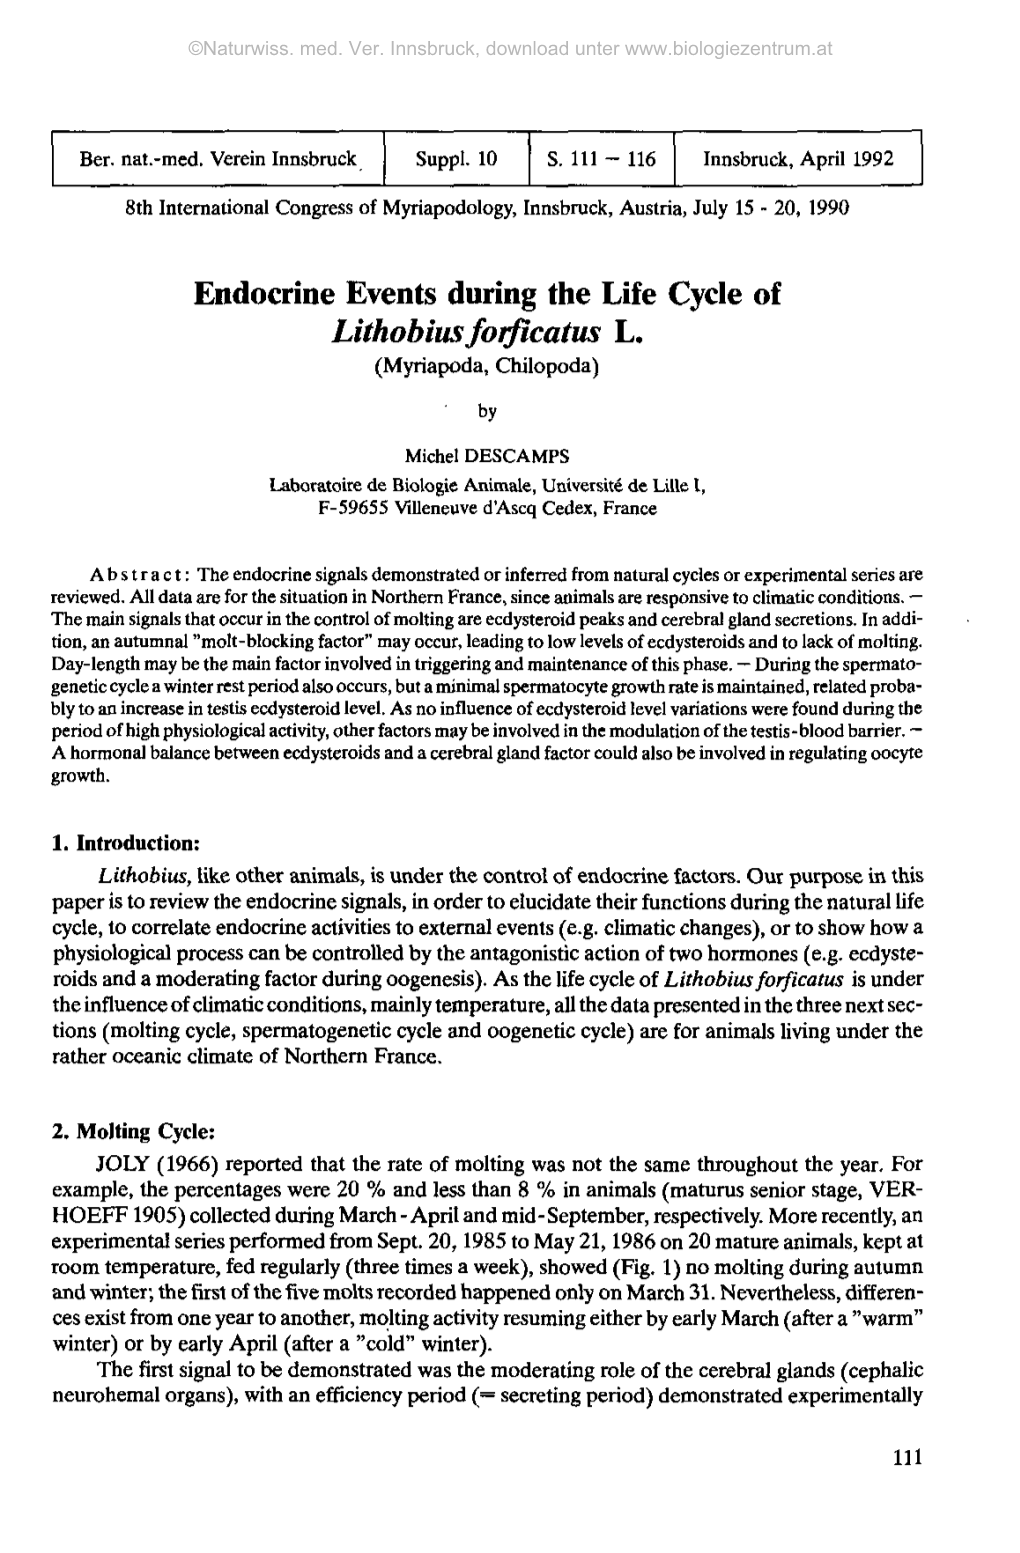 Endocrine Events During the Life Cycle of Lithobius Forficatus L. (Myriapoda, Chilopoda)